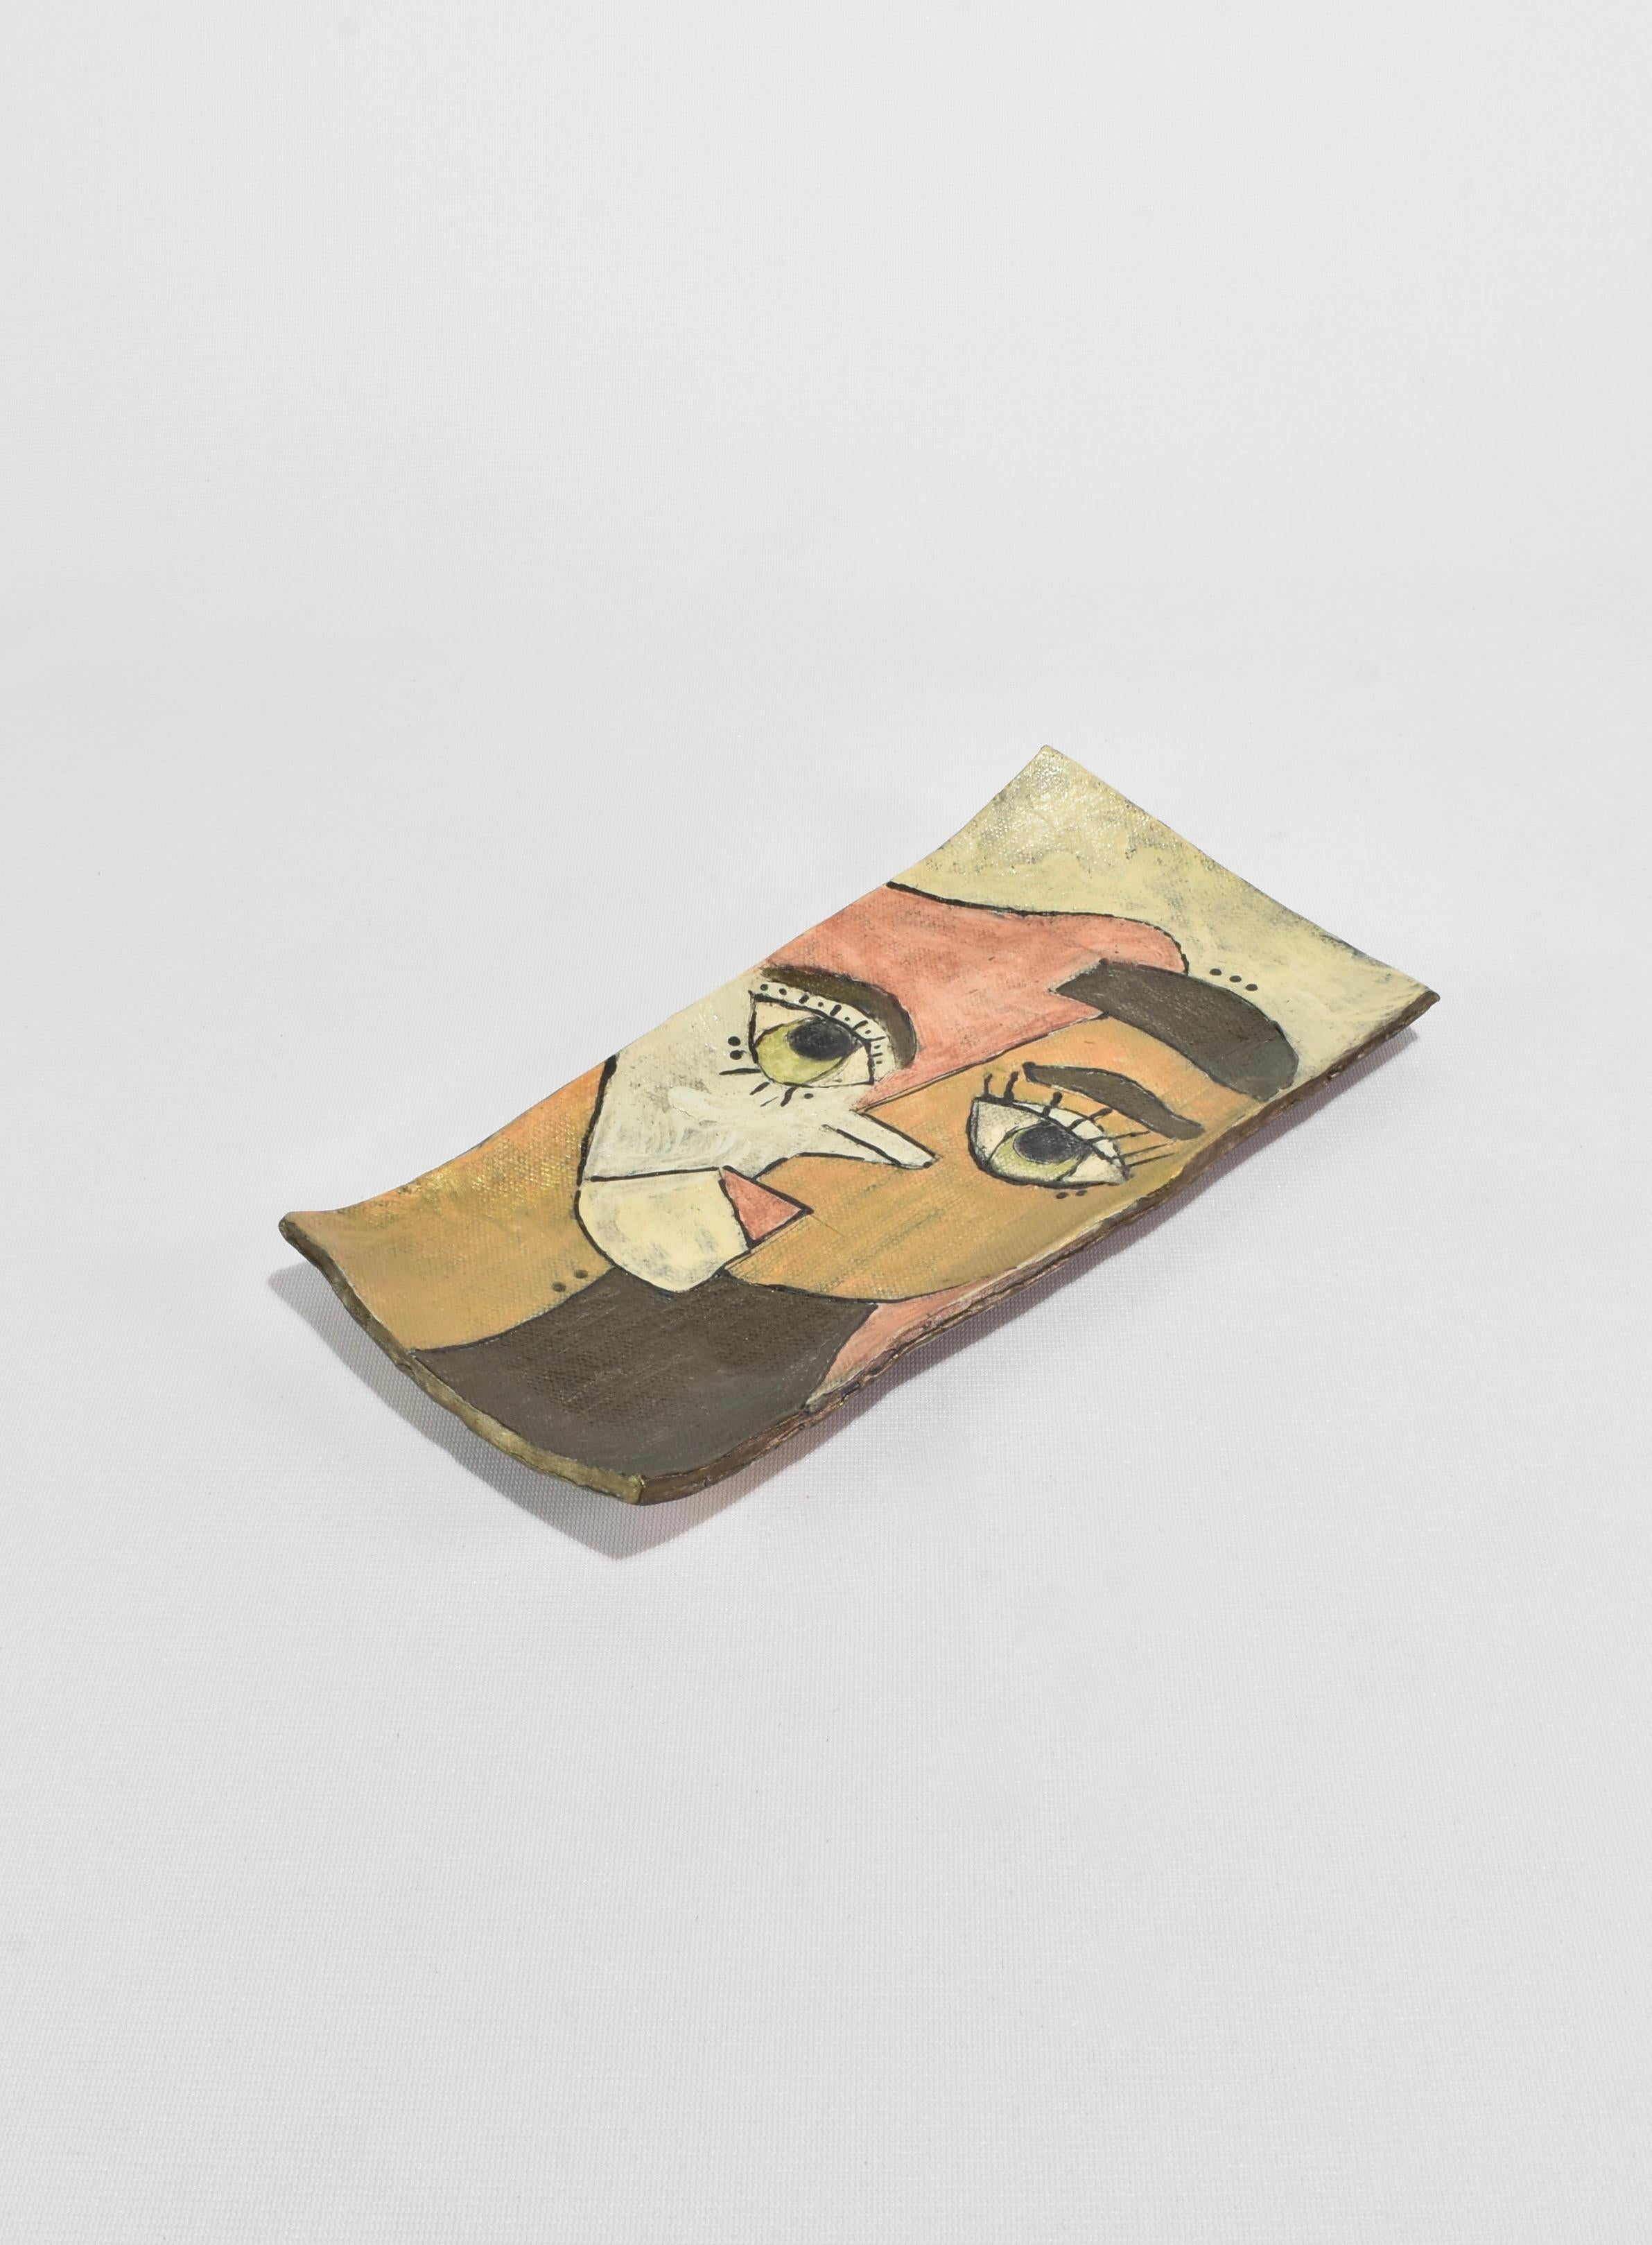 Hand-Crafted Cubist Face Tray For Sale